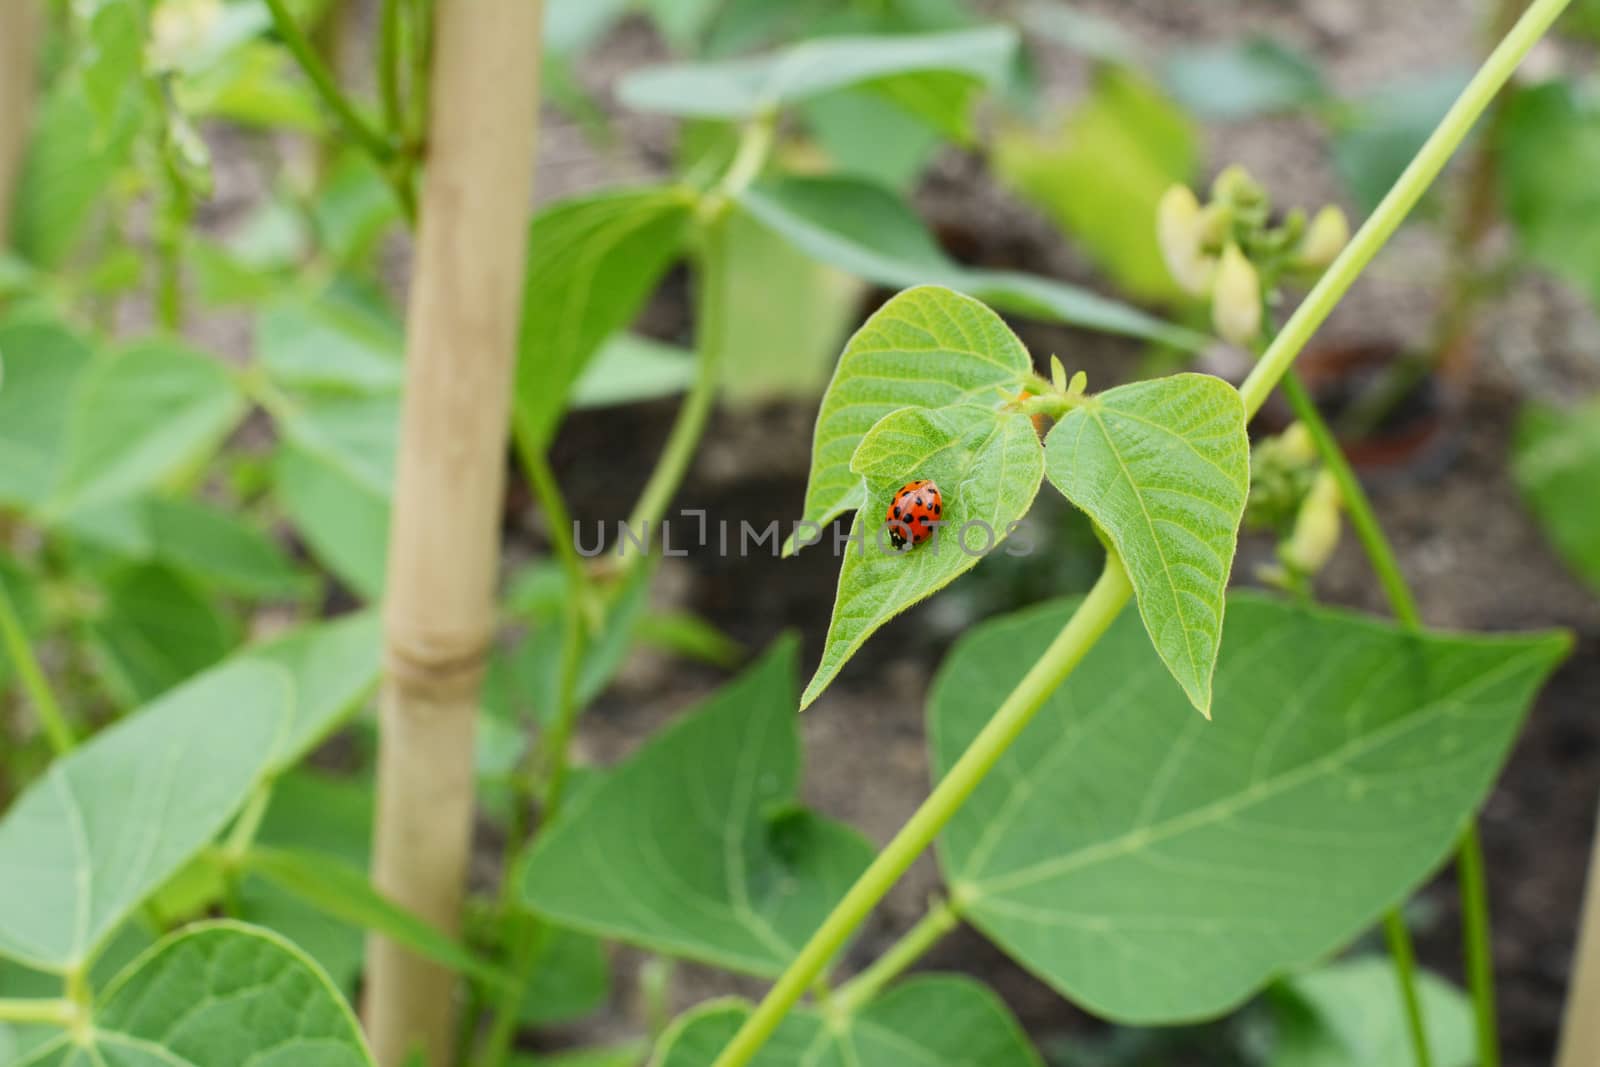 Harlequin ladybird on the leaf of a runner bean vine  by sarahdoow